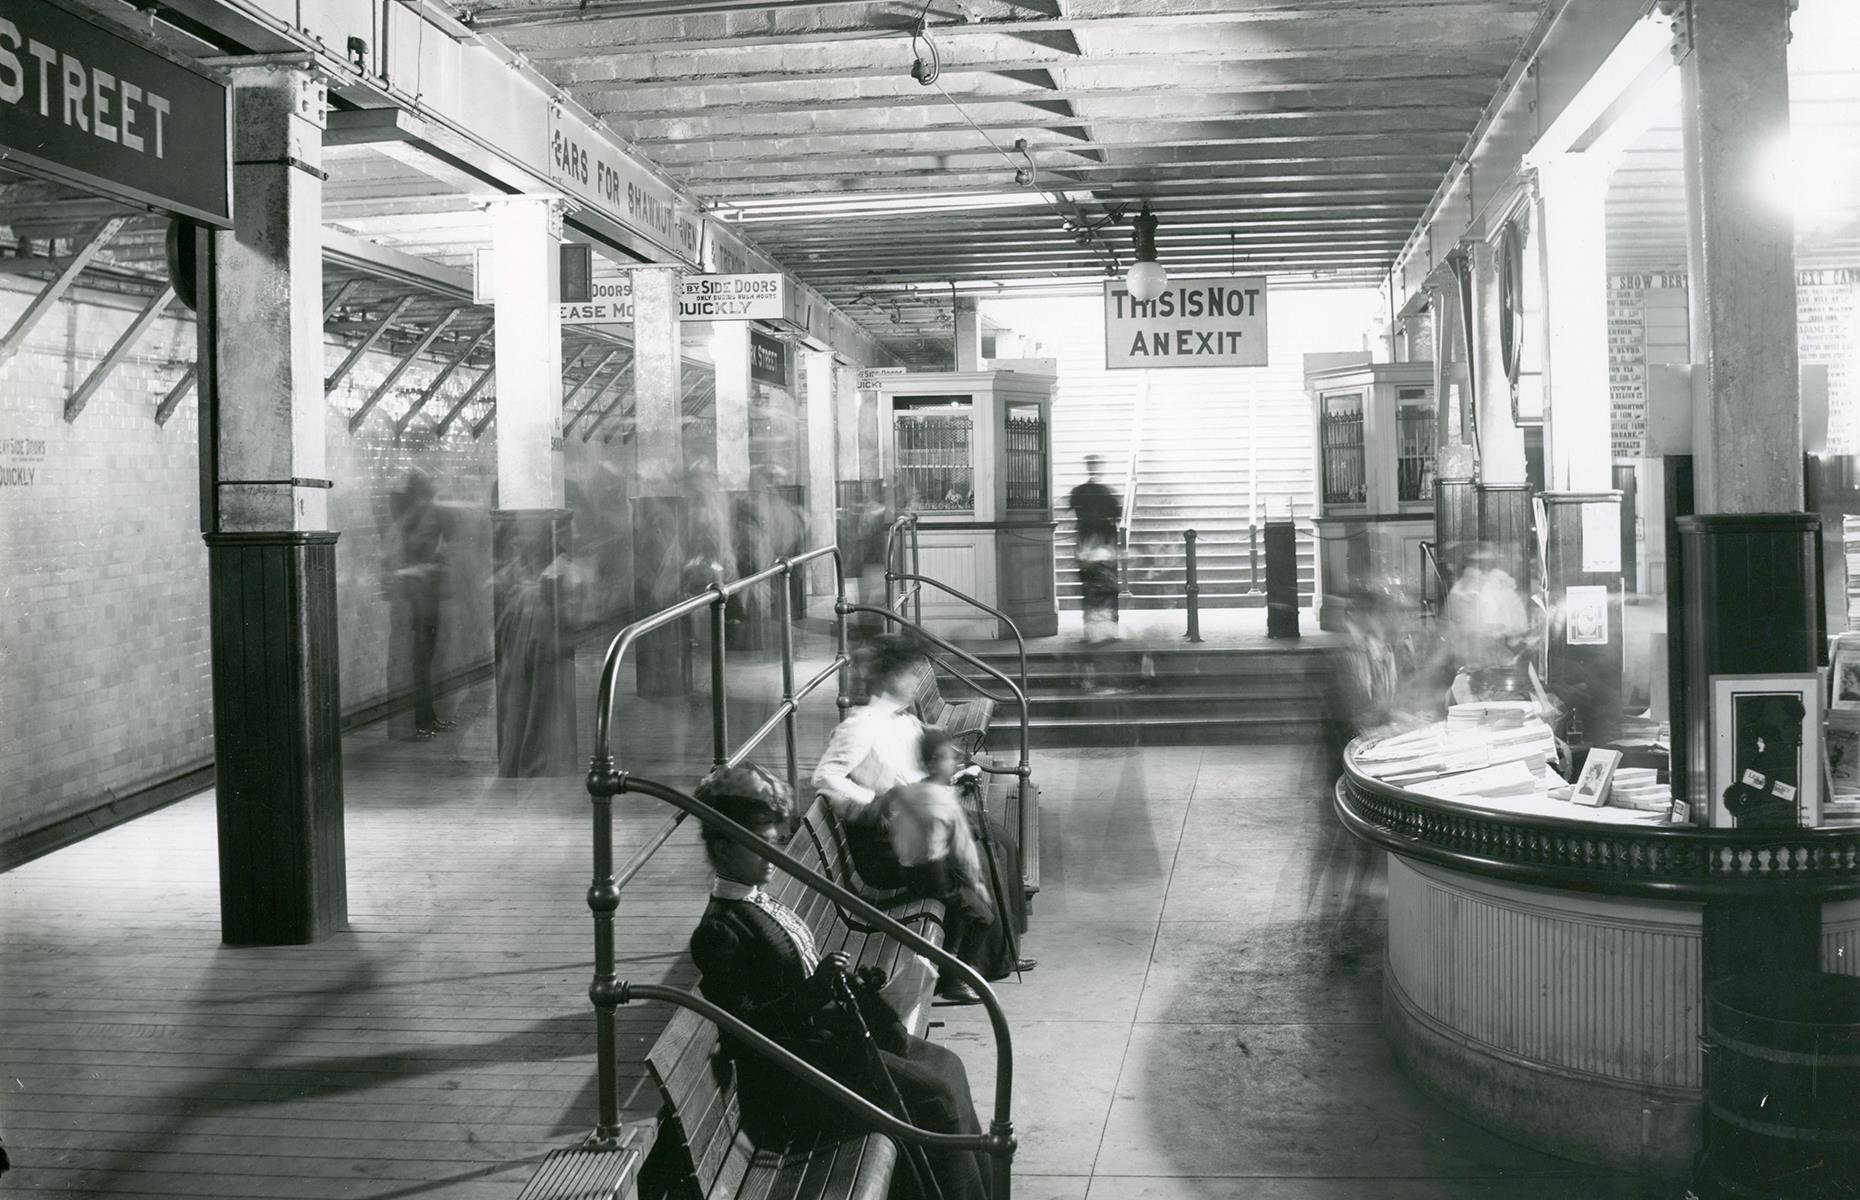 New York City's subway system may be the most famous in America, but it's not the oldest. That honor goes to Boston, whose underground rail services debuted in 1897 with the Green Line, running through Tremont Street. This photo was taken a few years later, in 1901, and shows passengers waiting underground at Park Street station, another stop on the Green Line.